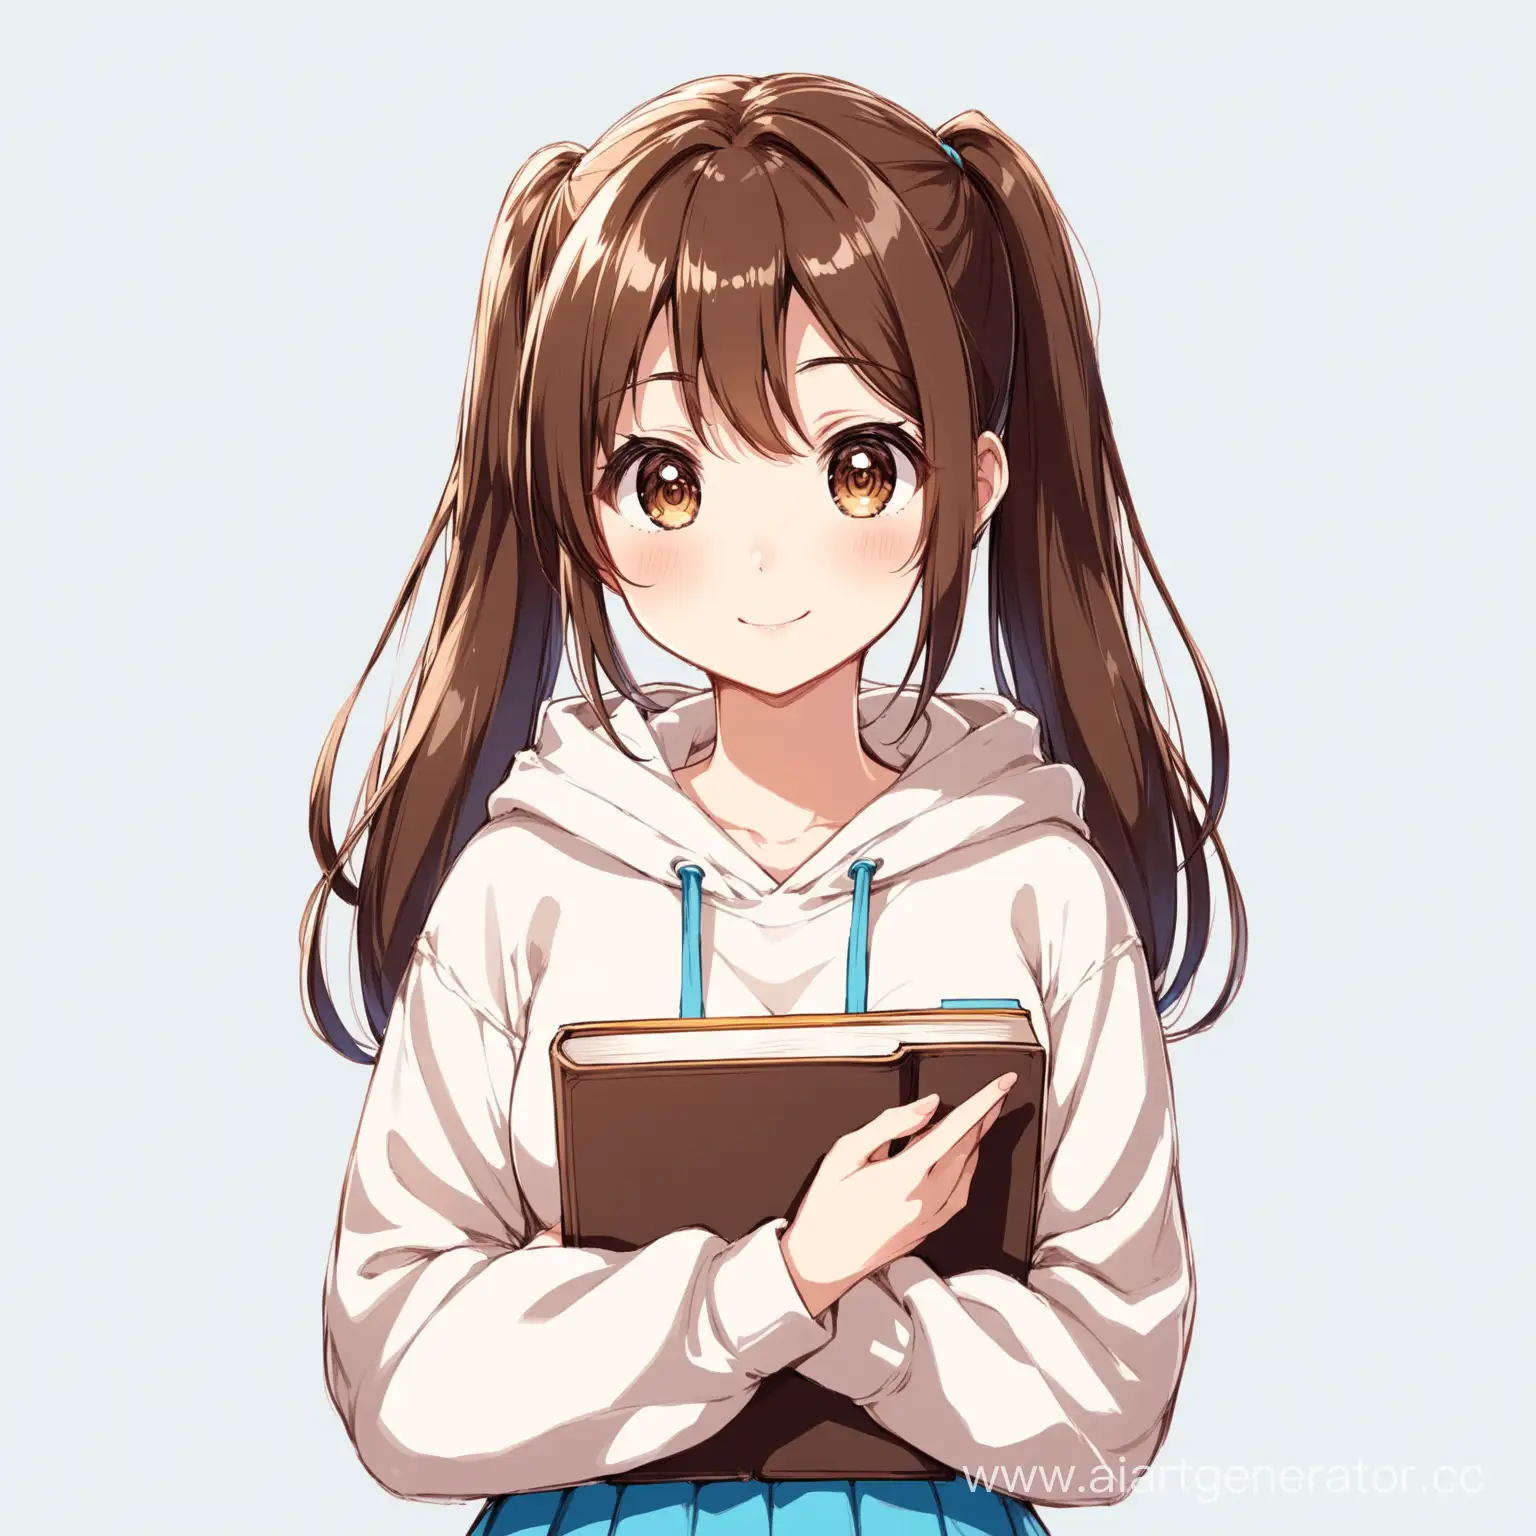 Cute-Anime-Woman-with-Ponytails-Holding-Book